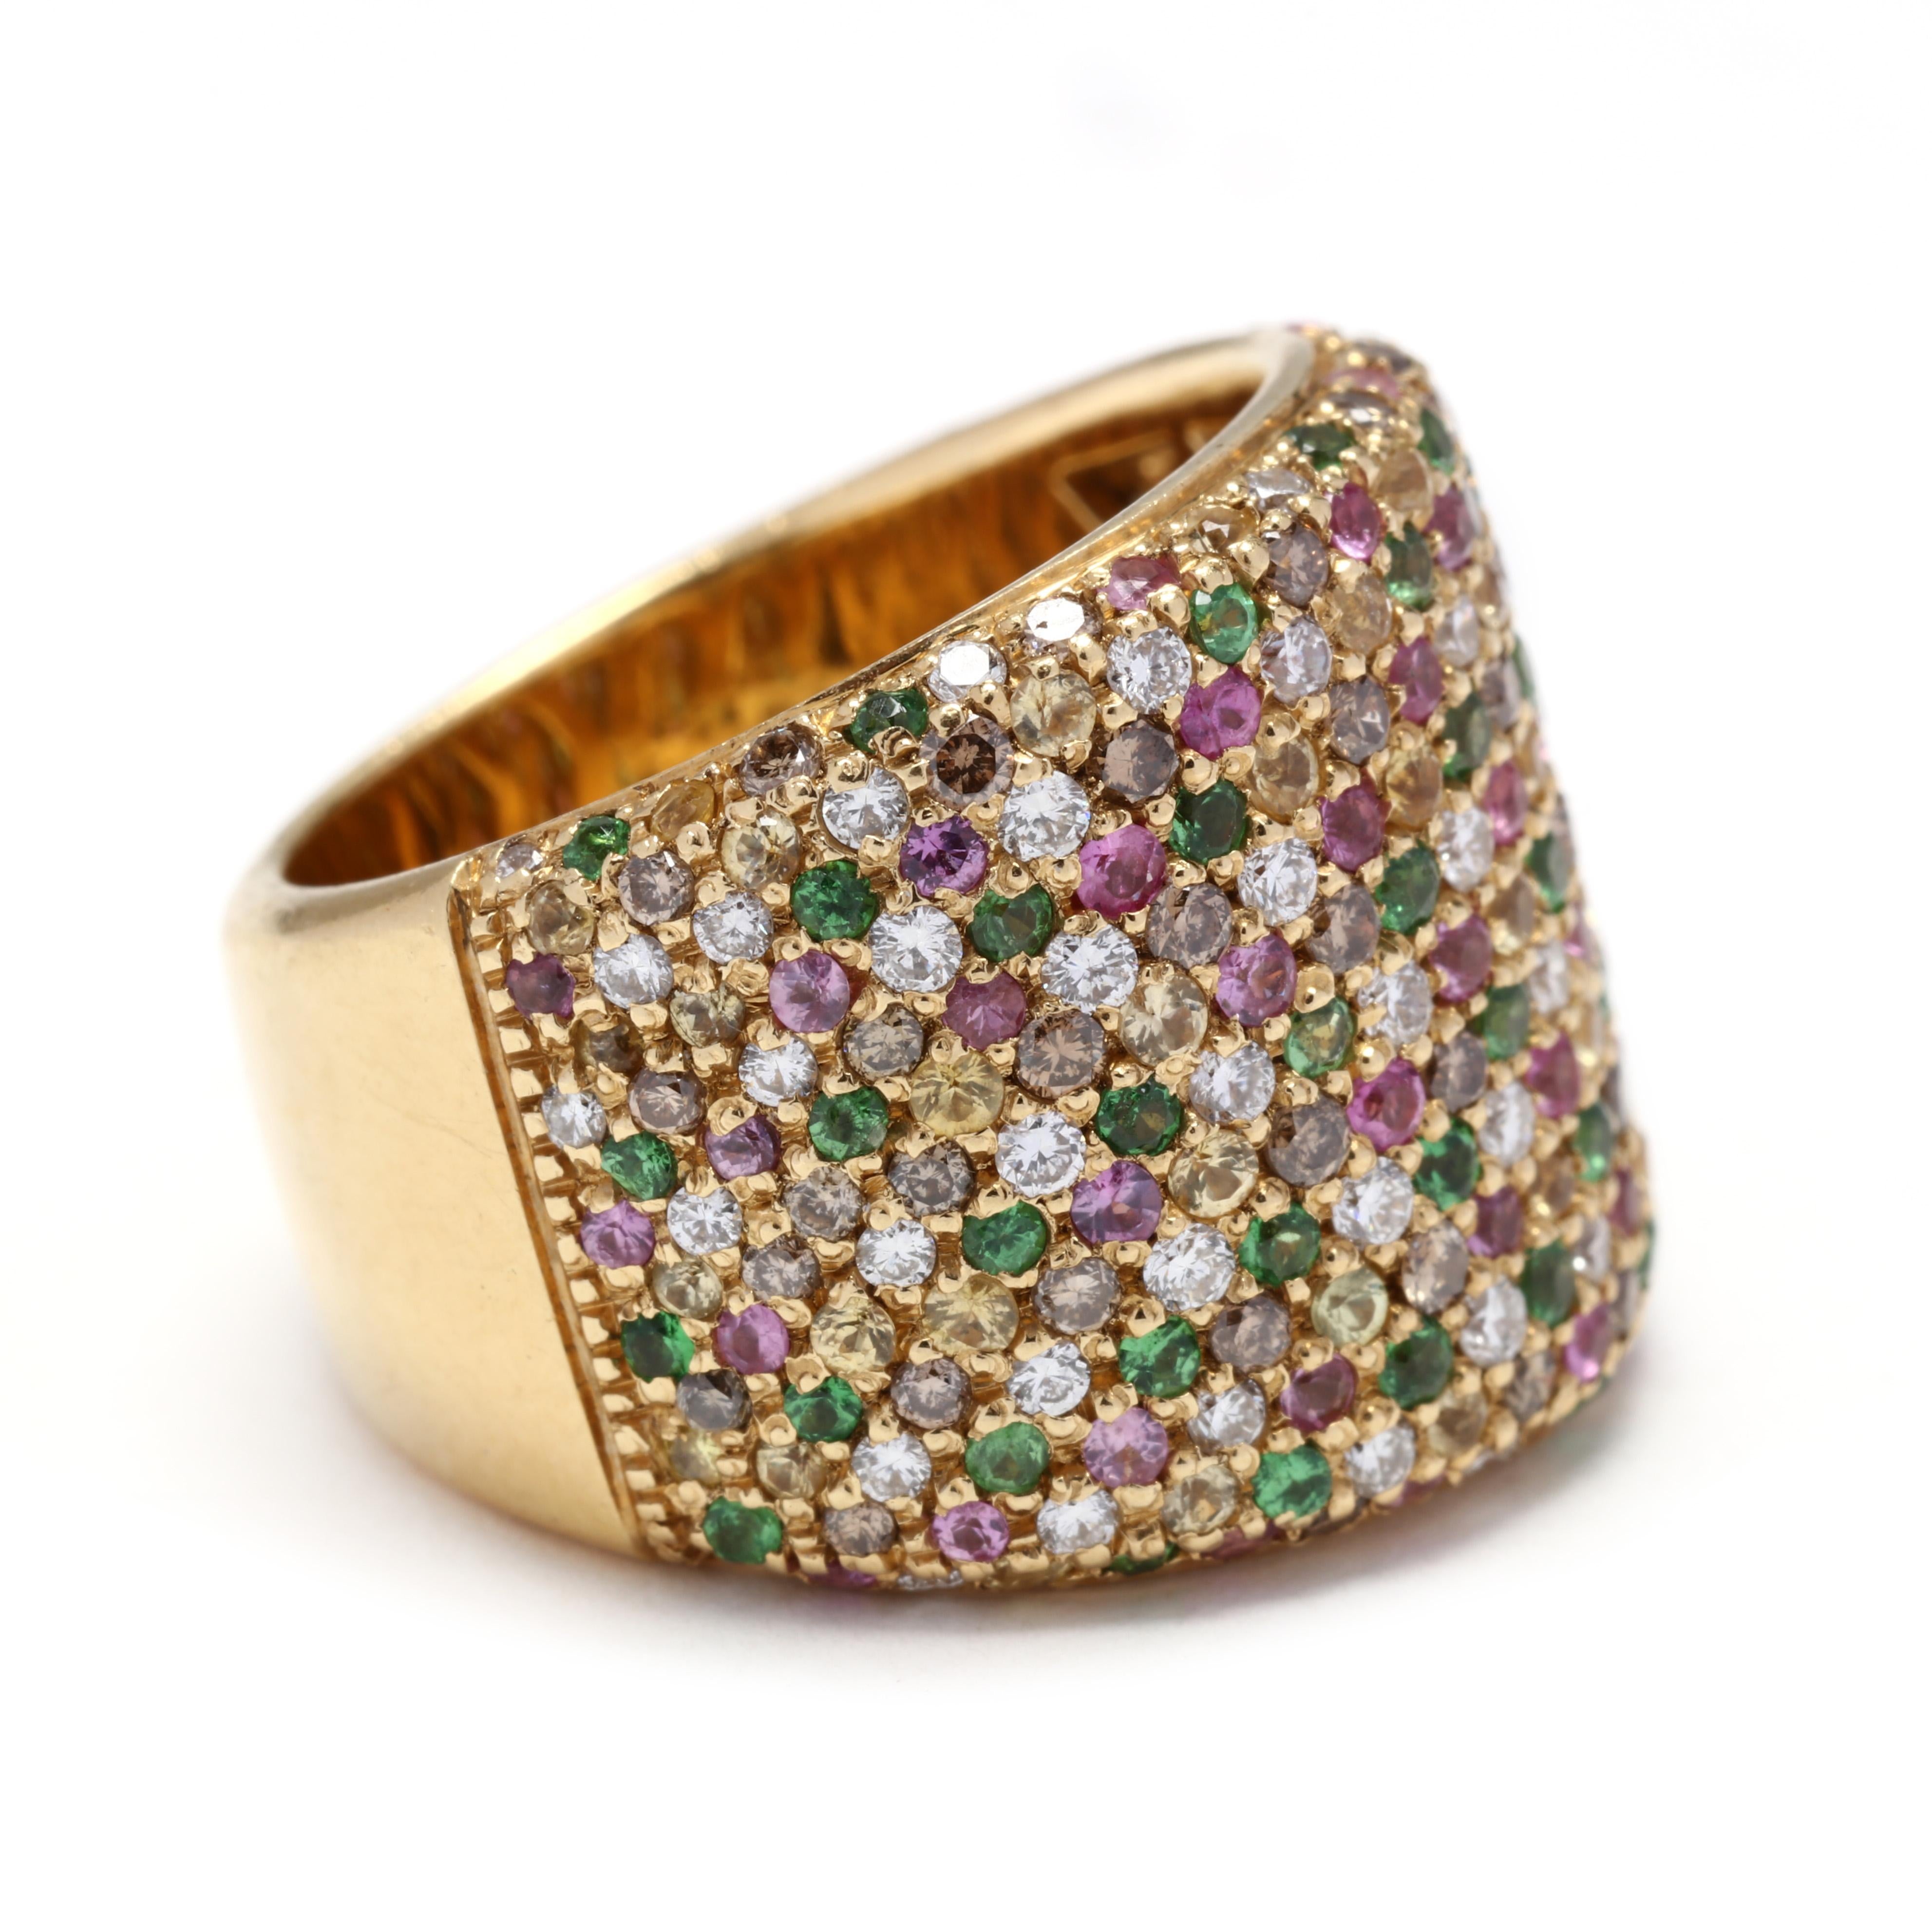 An 18 karat yellow gold diamond and mult gemstone pavé band. This band features a wide tapered design with pavé set round cut stones including diamonds, light brown diamonds, tsavorite garnets, pink sapphires and yellow sapphires.

Stones:

-